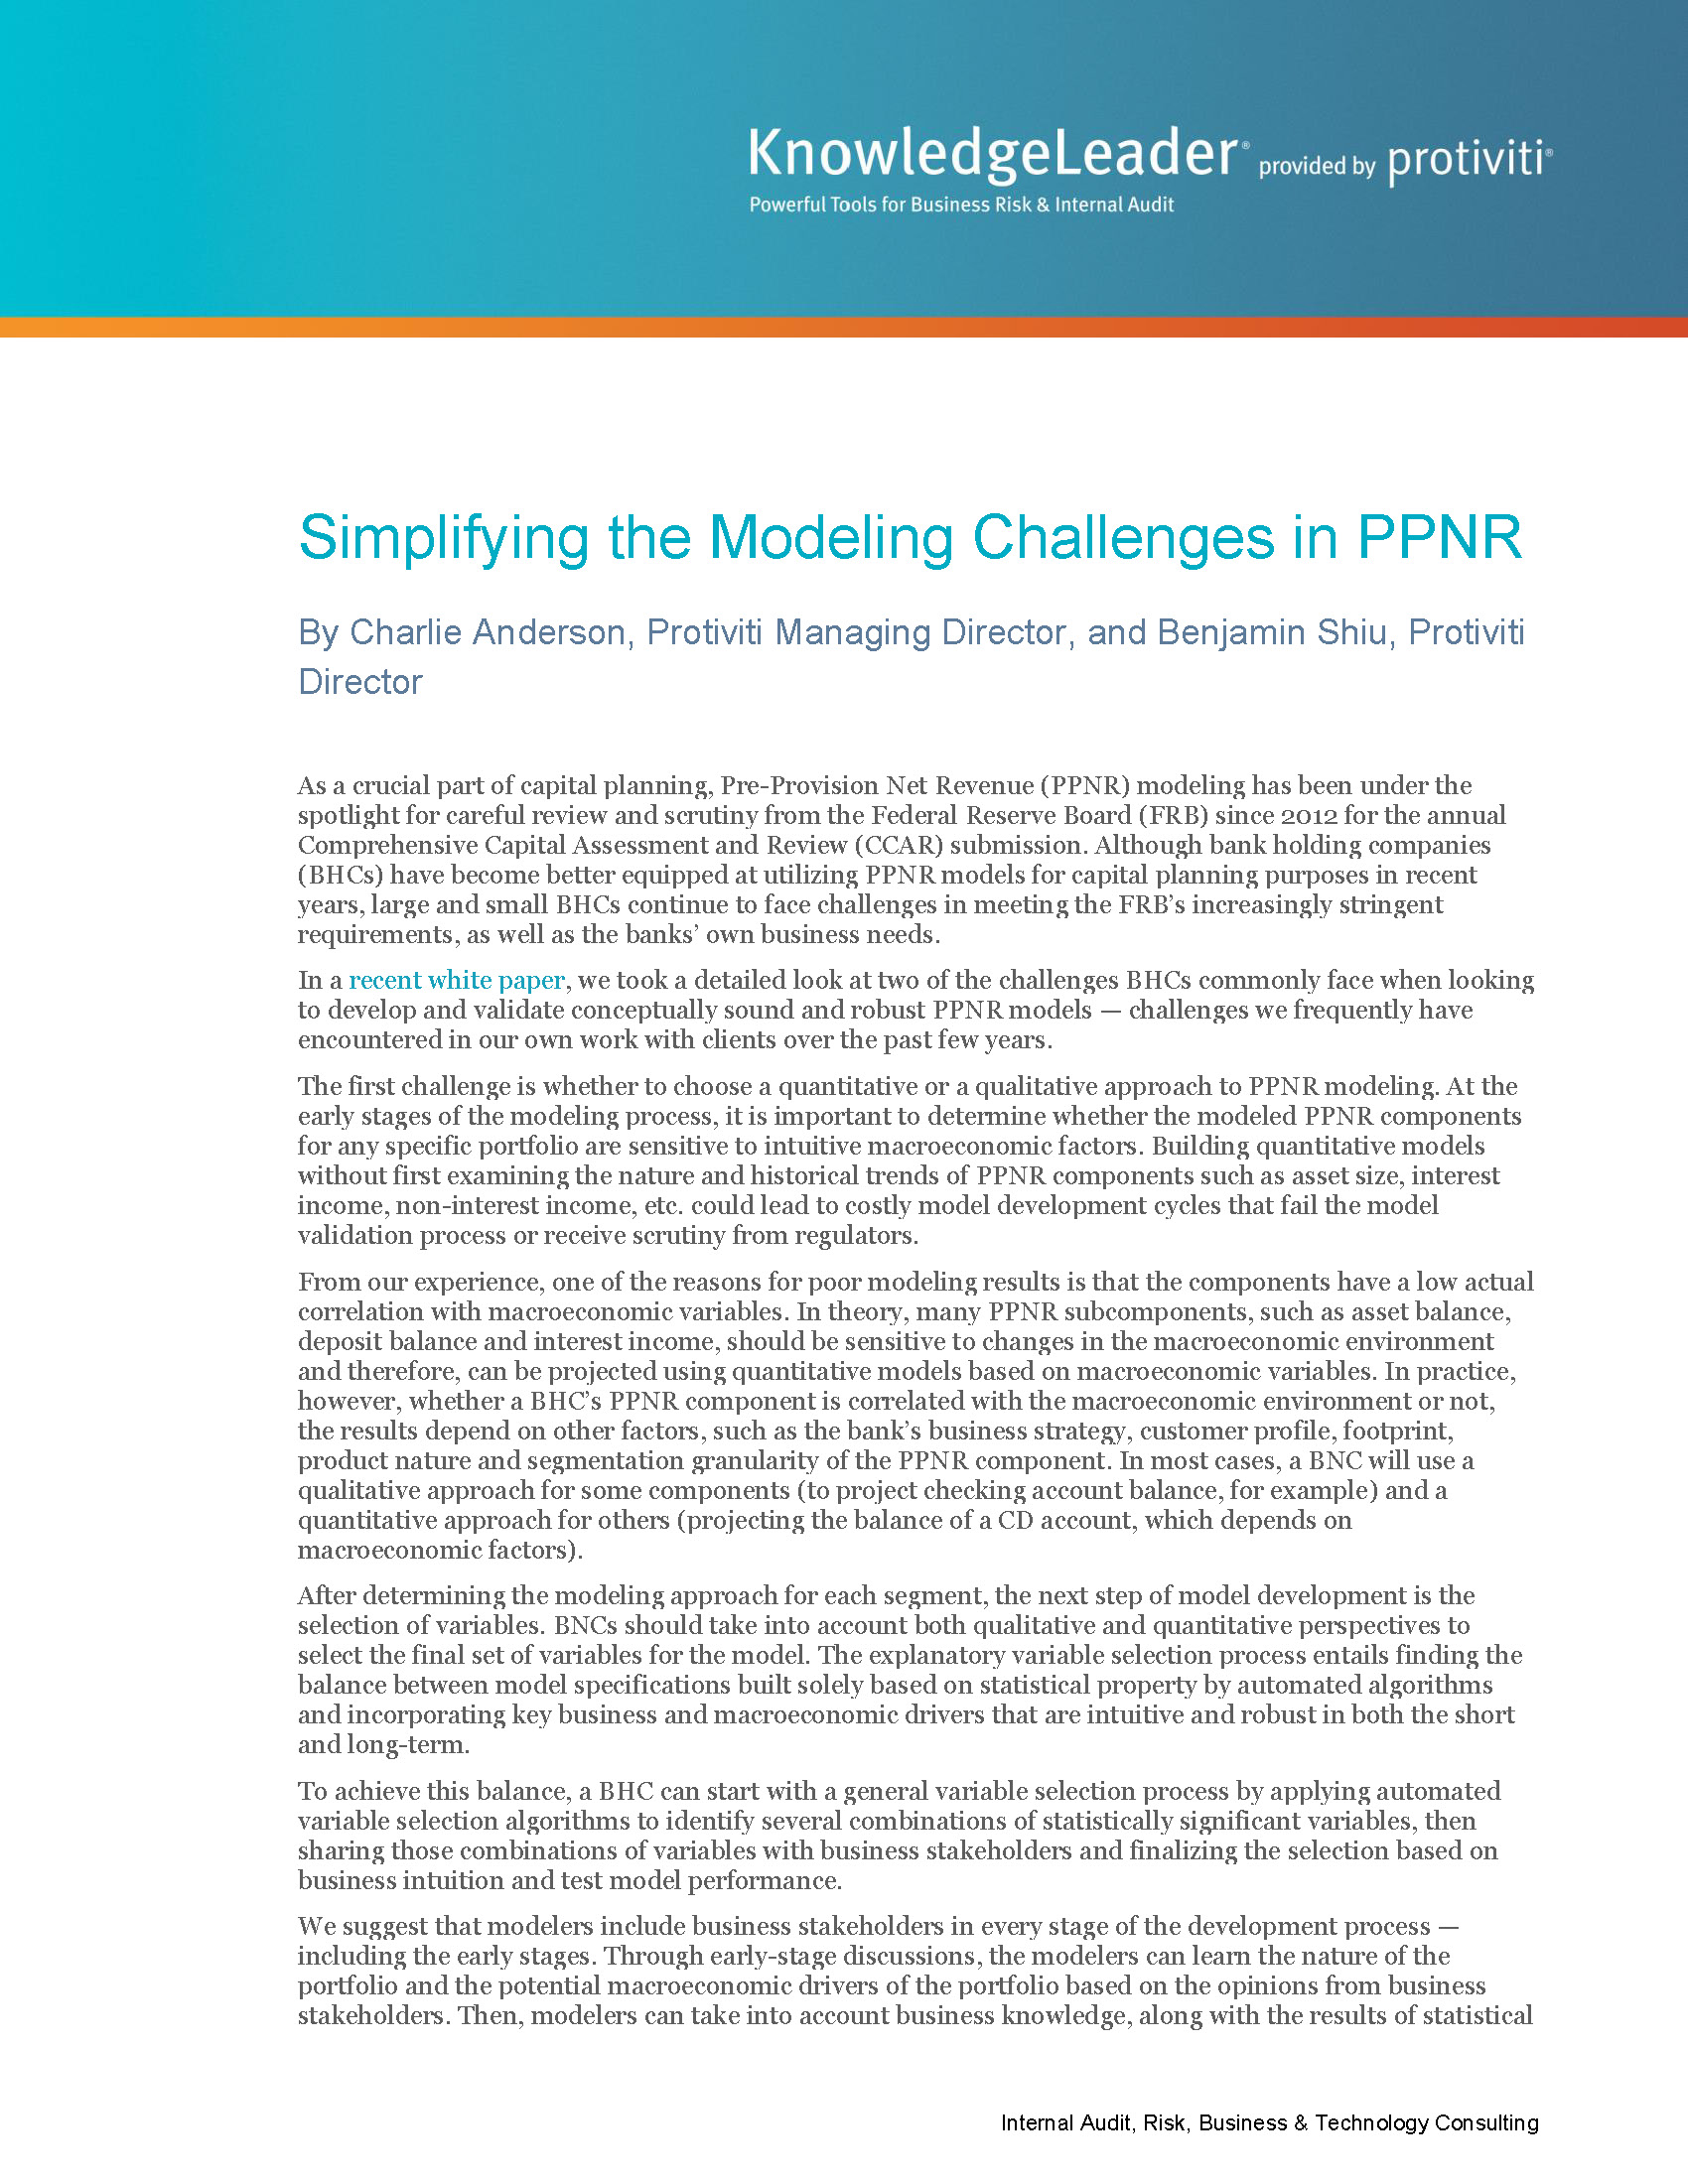 Screenshot of the first page of Simplifying the Modeling Challenges in PPNR